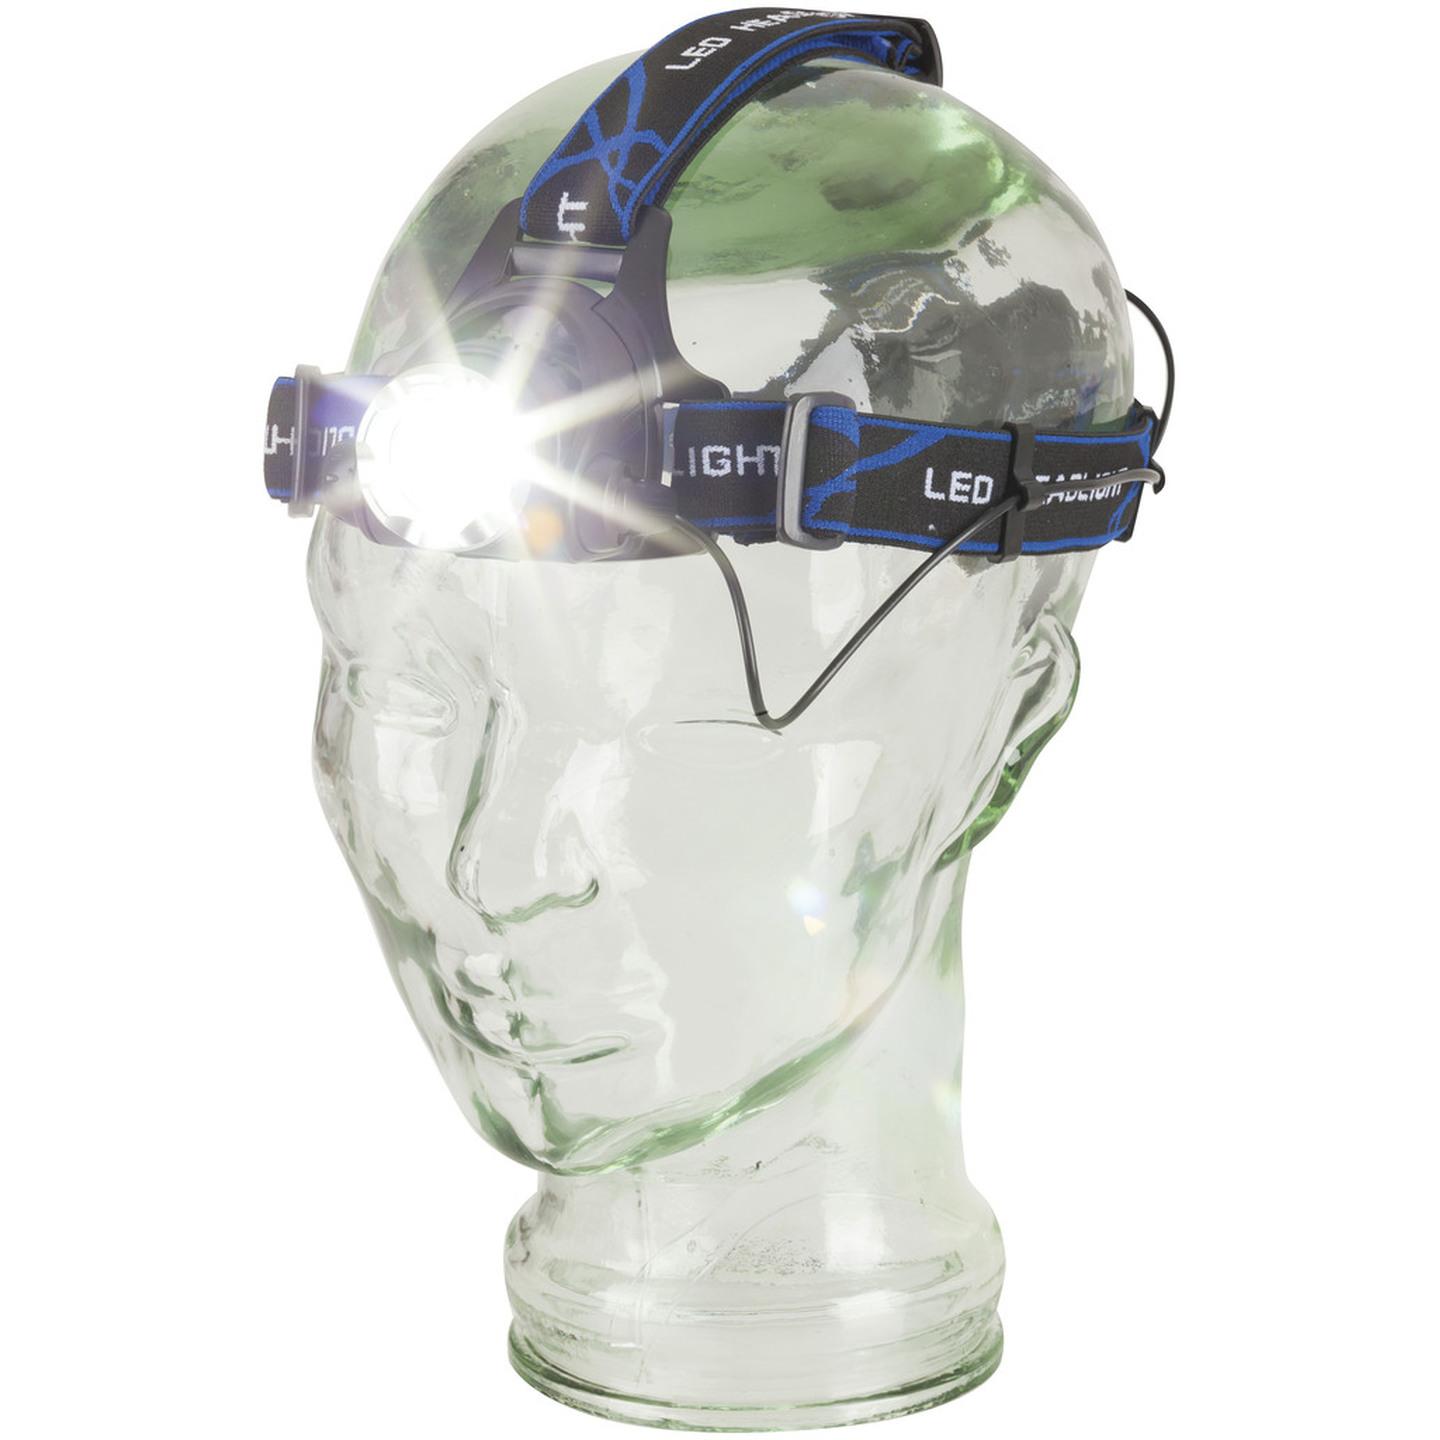 Head Torch with Adjustable Beam